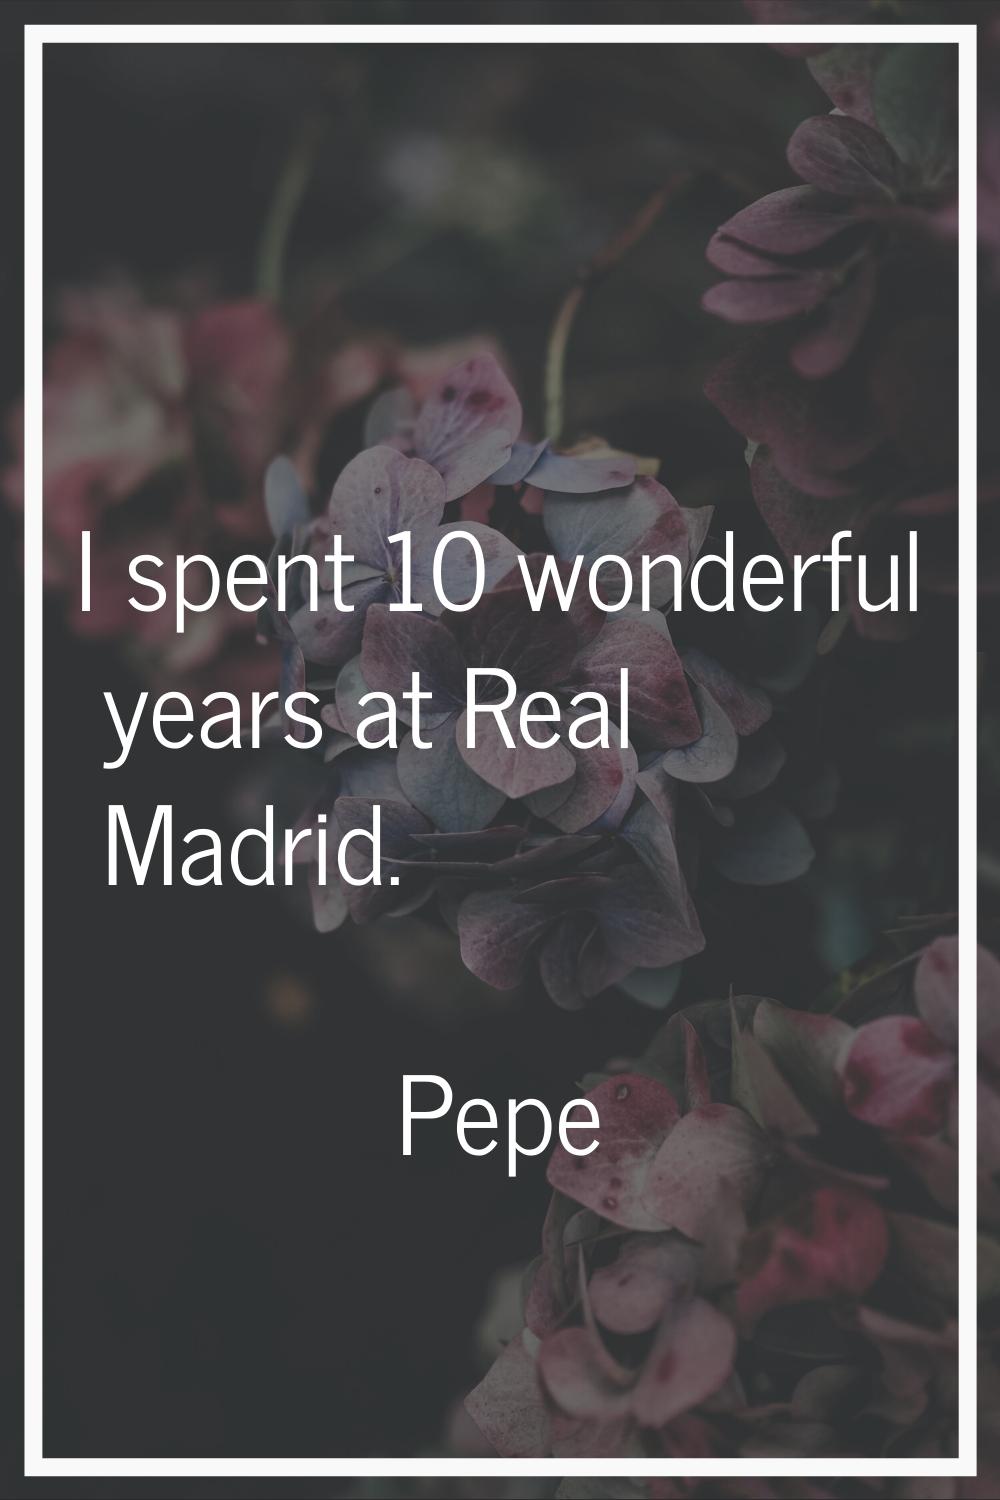 I spent 10 wonderful years at Real Madrid.